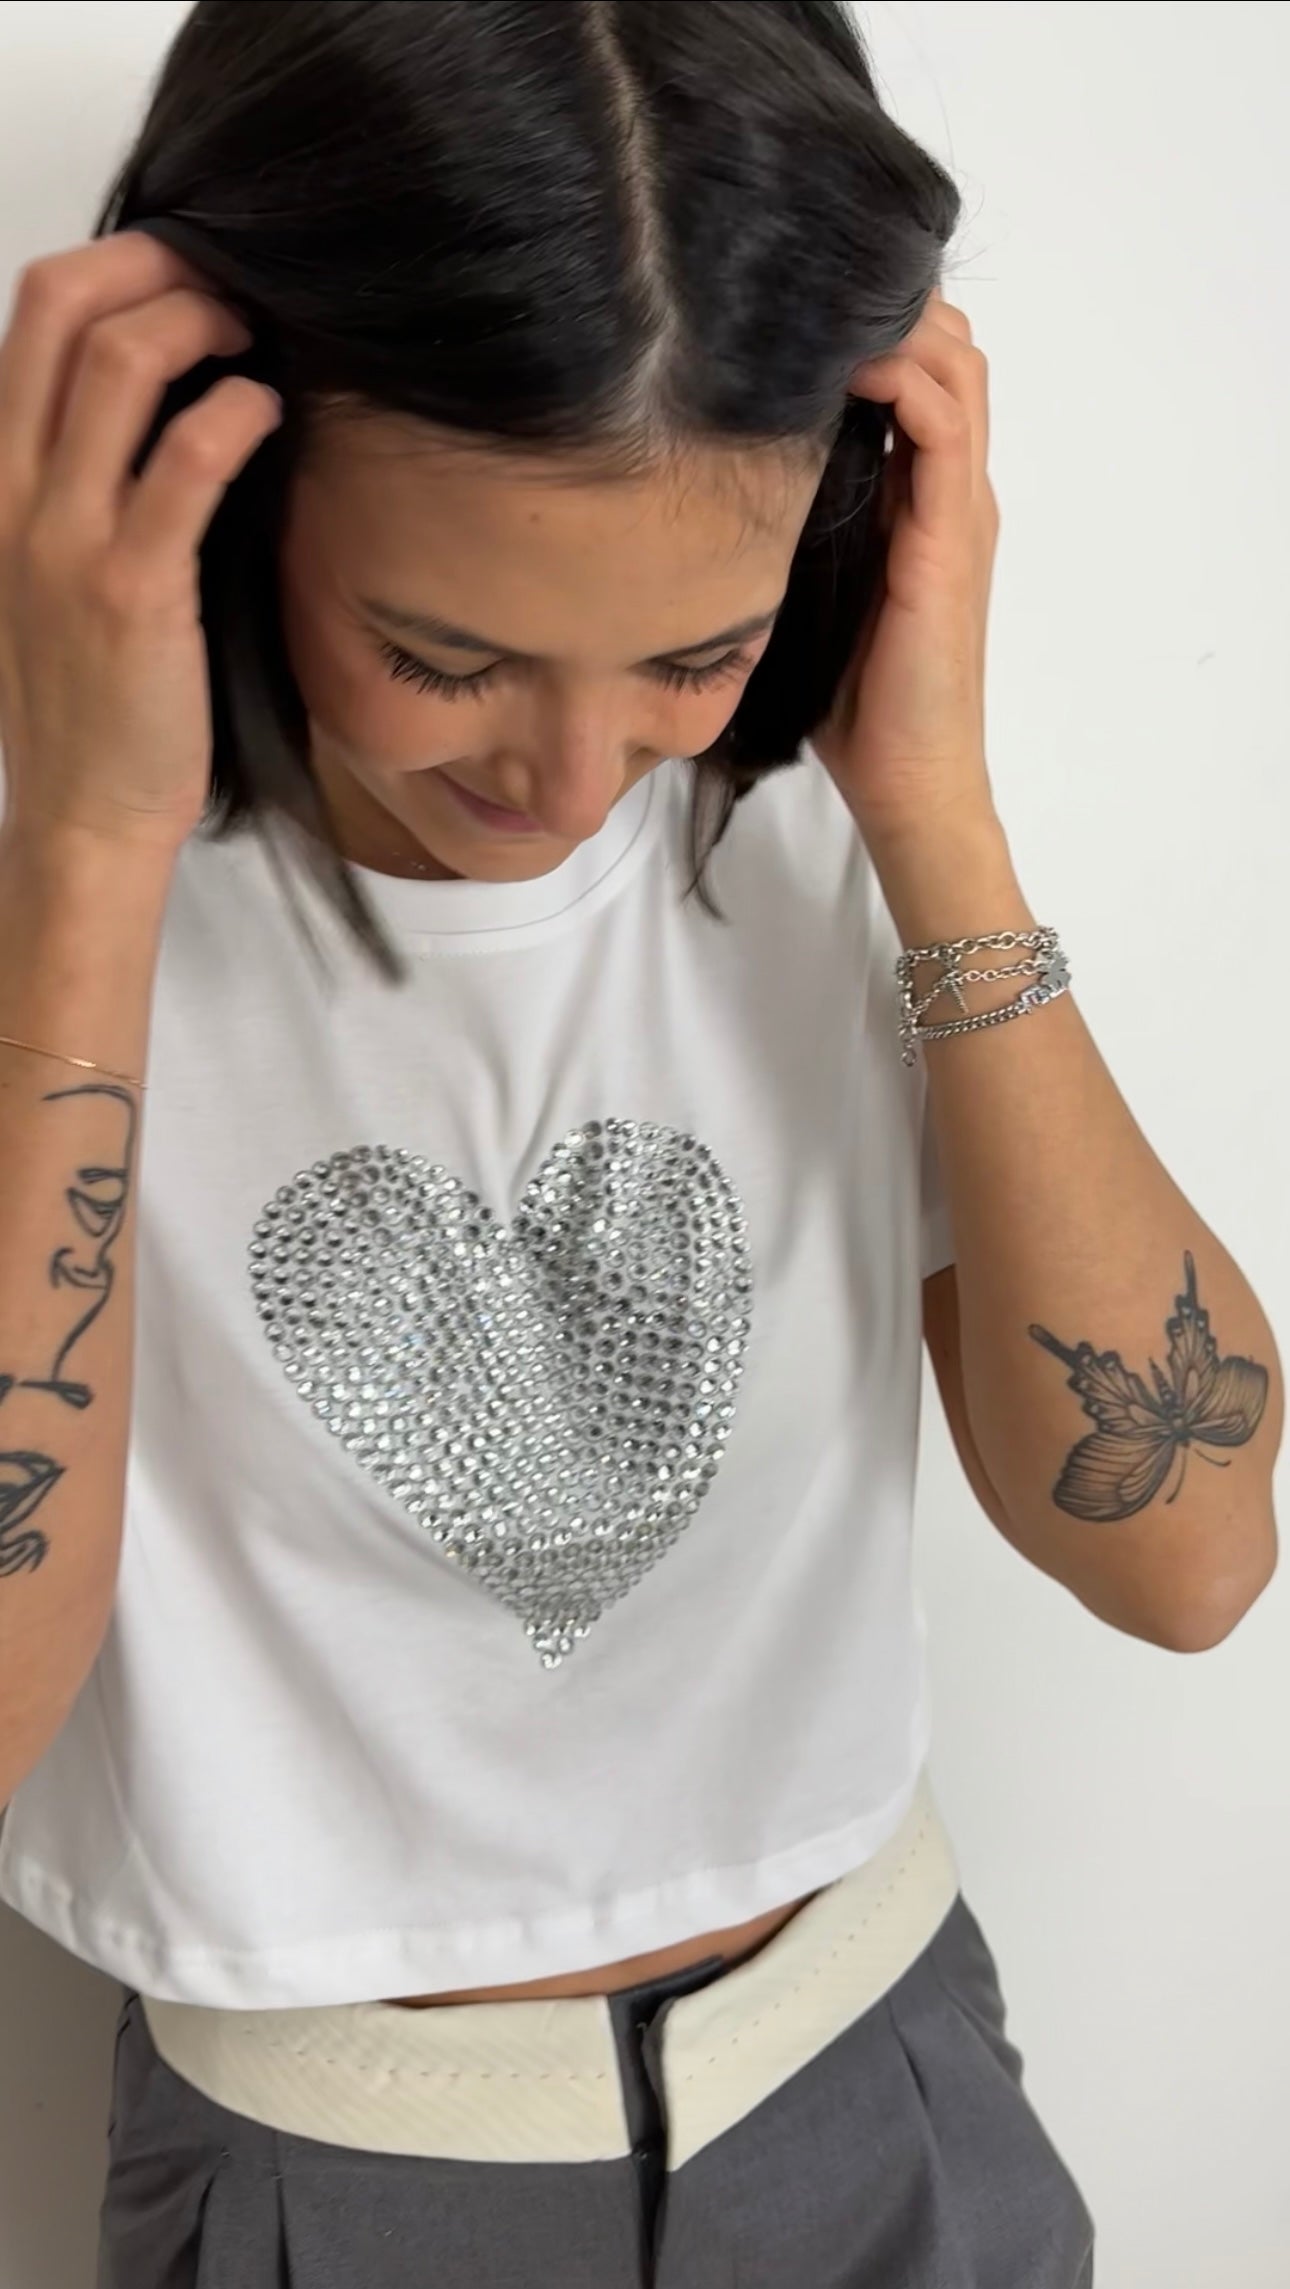 T-shirt cuore